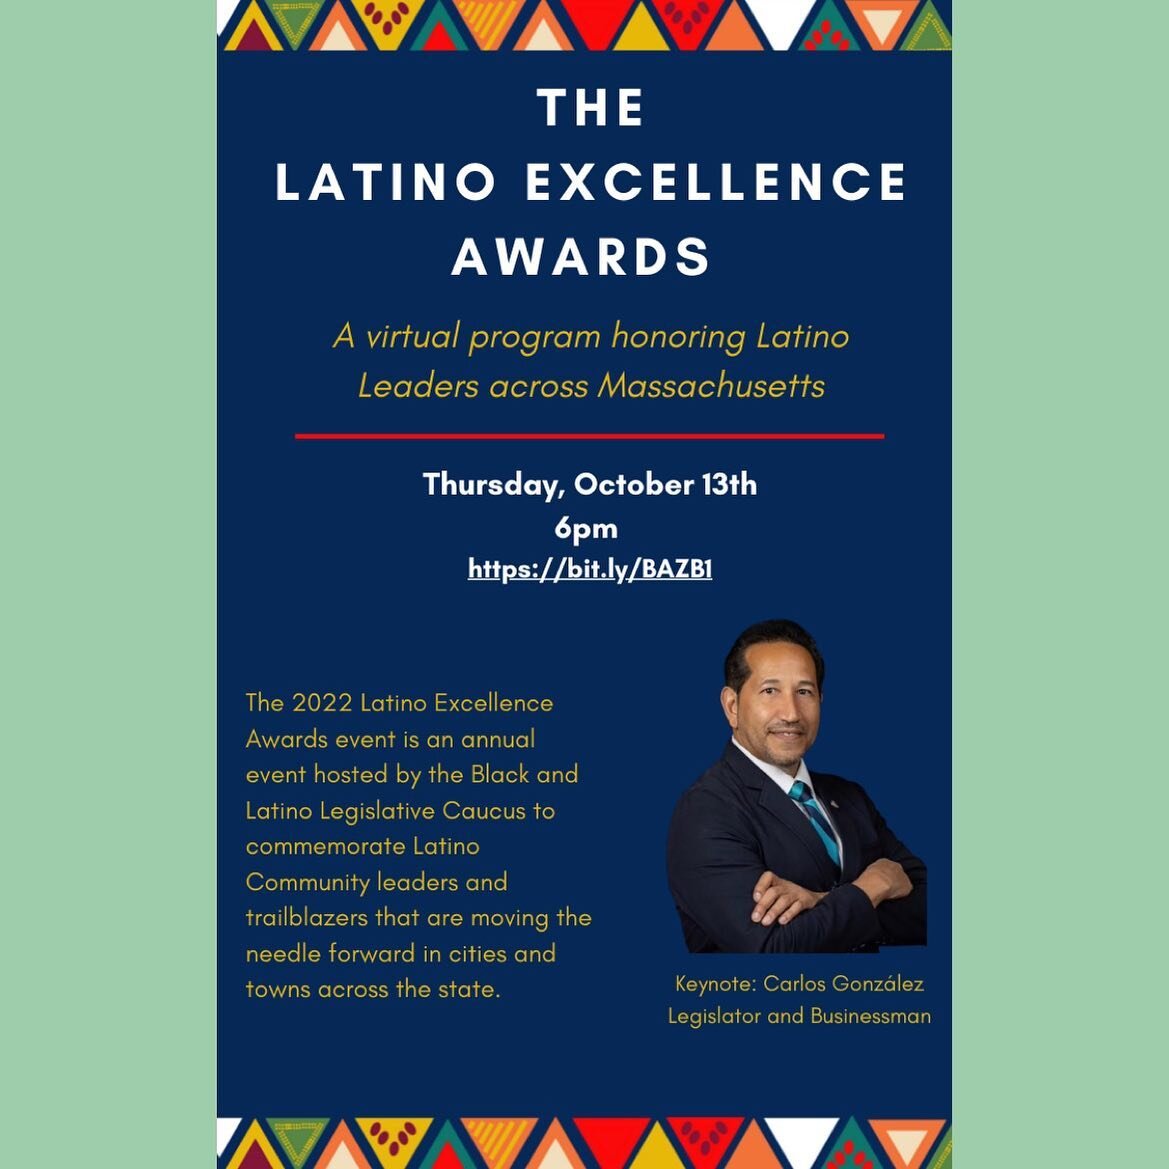 KEYNOTE CHANGE! Please join us virtually today @ 6:00pm EST for the MBLLC's premier Hispanic Heritage Month event-- the Latino Excellence Awards!

Type the link located on the flyer in your browser to RSVP! Let us know in the comments if we will see 